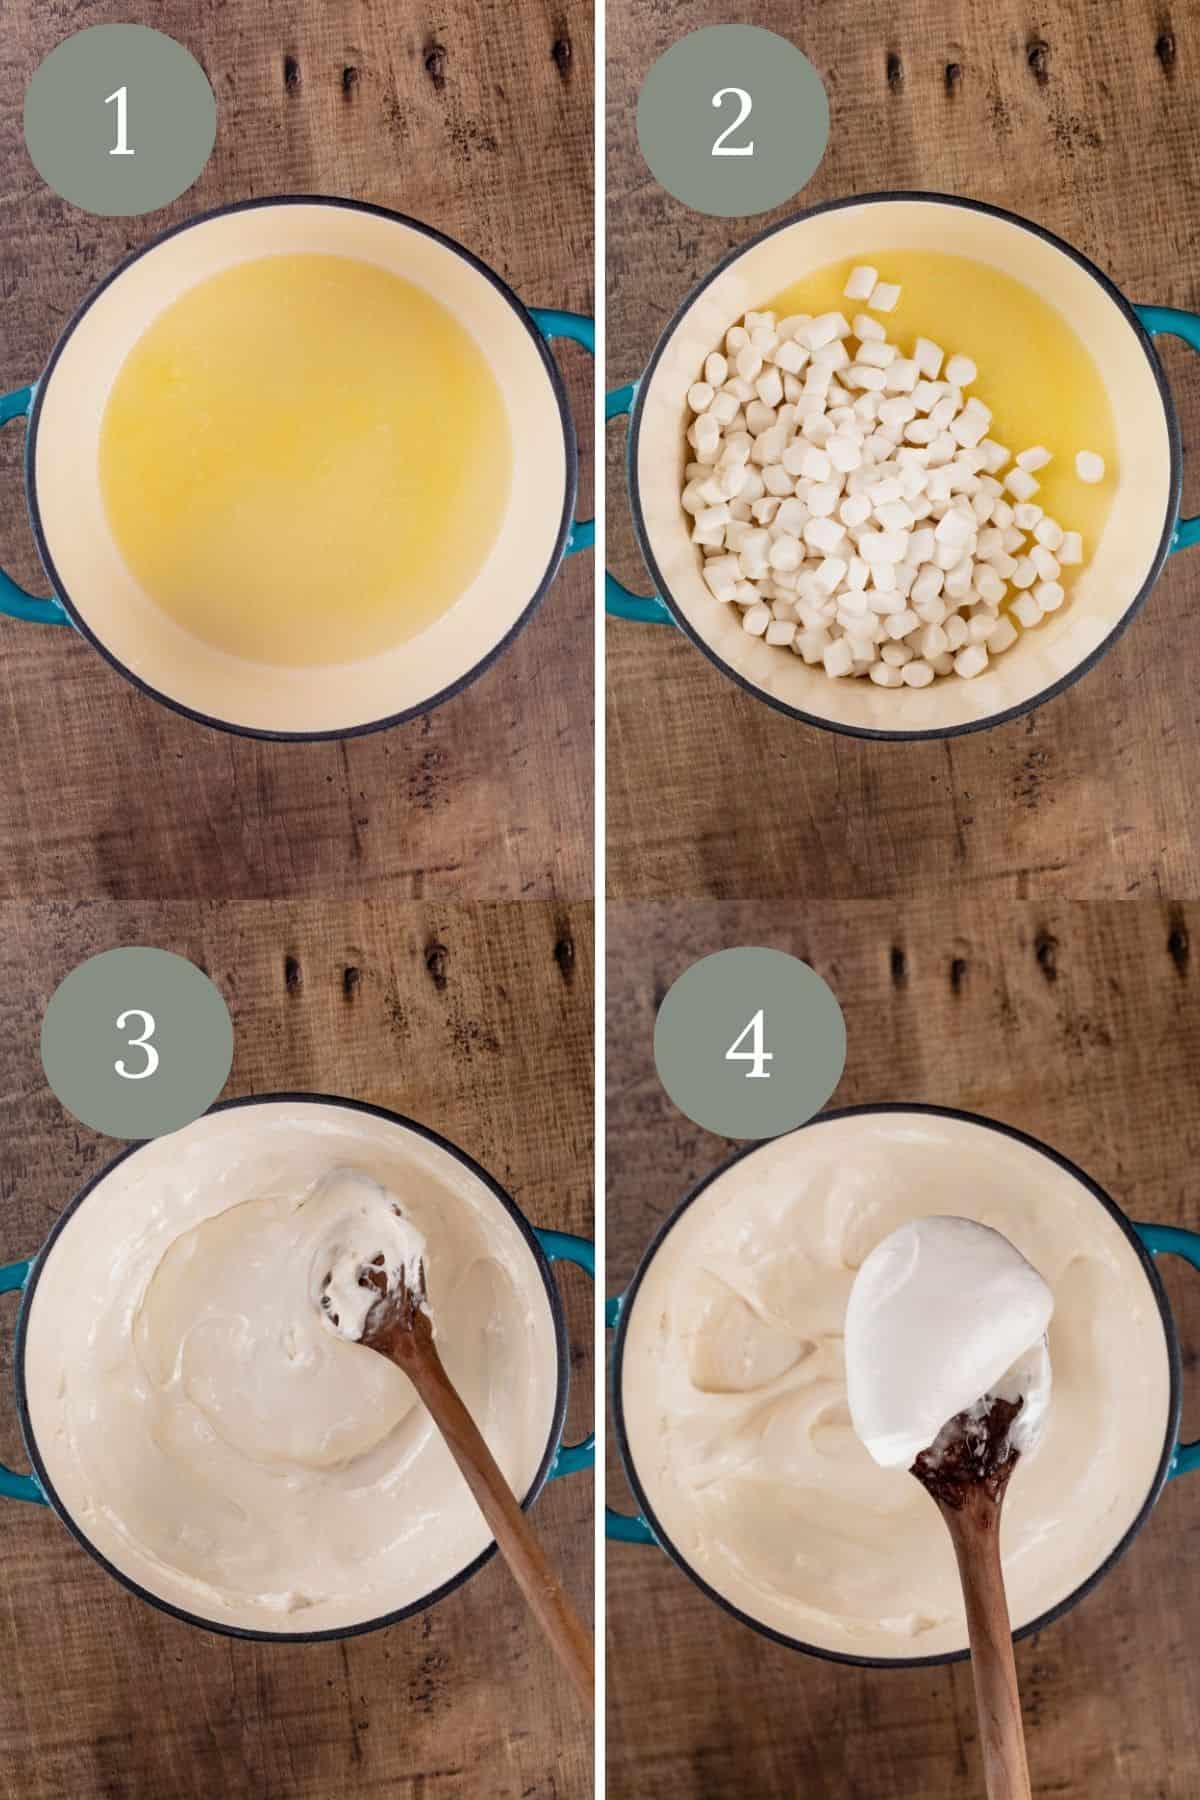 Steps 1 through 4 of making rice crispy treats in a collage. It shows the melted butter, adding marshmallows, and what the fully melted marshmallows look like up close.